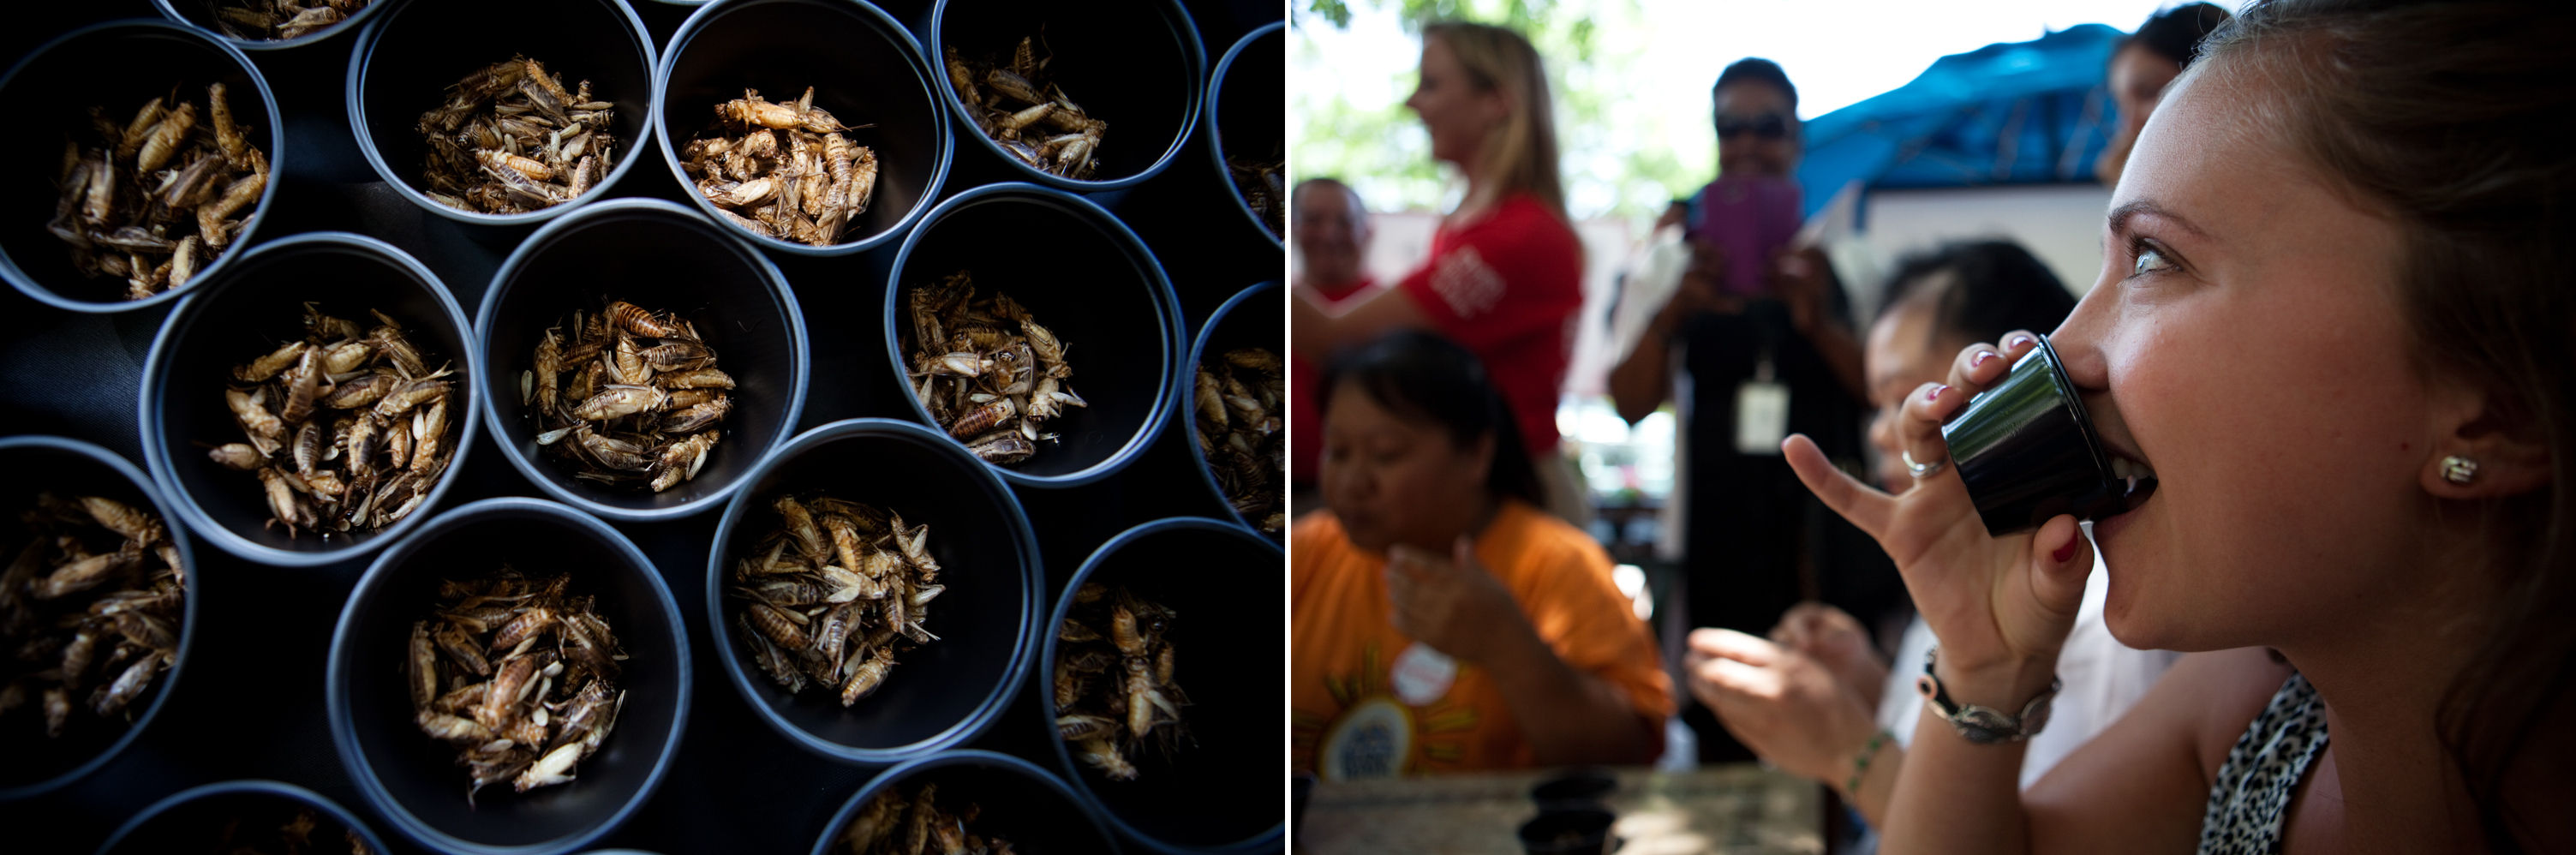 Katherine Eklund, with D.C Central Kitchen, competes in a cricket eating competition. Photo: Maggie Starbard/NPR